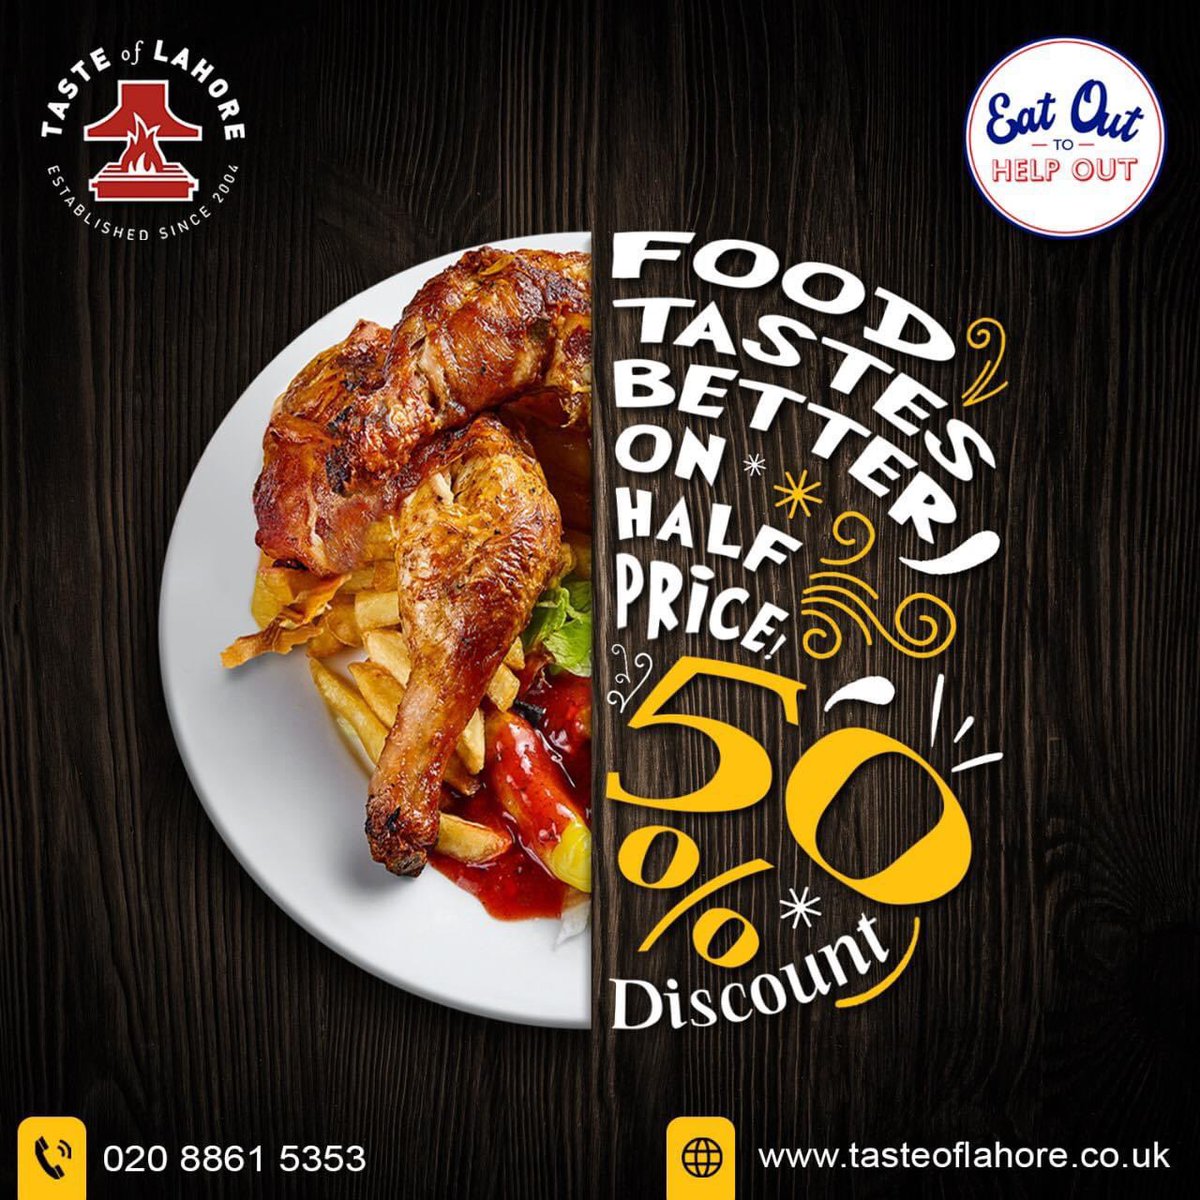 Fried Chicken With Chips! Tastes even better on a Wednesday with 50% #EatOutToHelpOut Discount! 

The offer applies only on dine in from Mon-Wed till 31st Aug.

#eatoutside #tasteoflahore #harrow #eatouttohelpoutlondon #wednesday #augustoffer #ukgovscheme #londonrestaurants